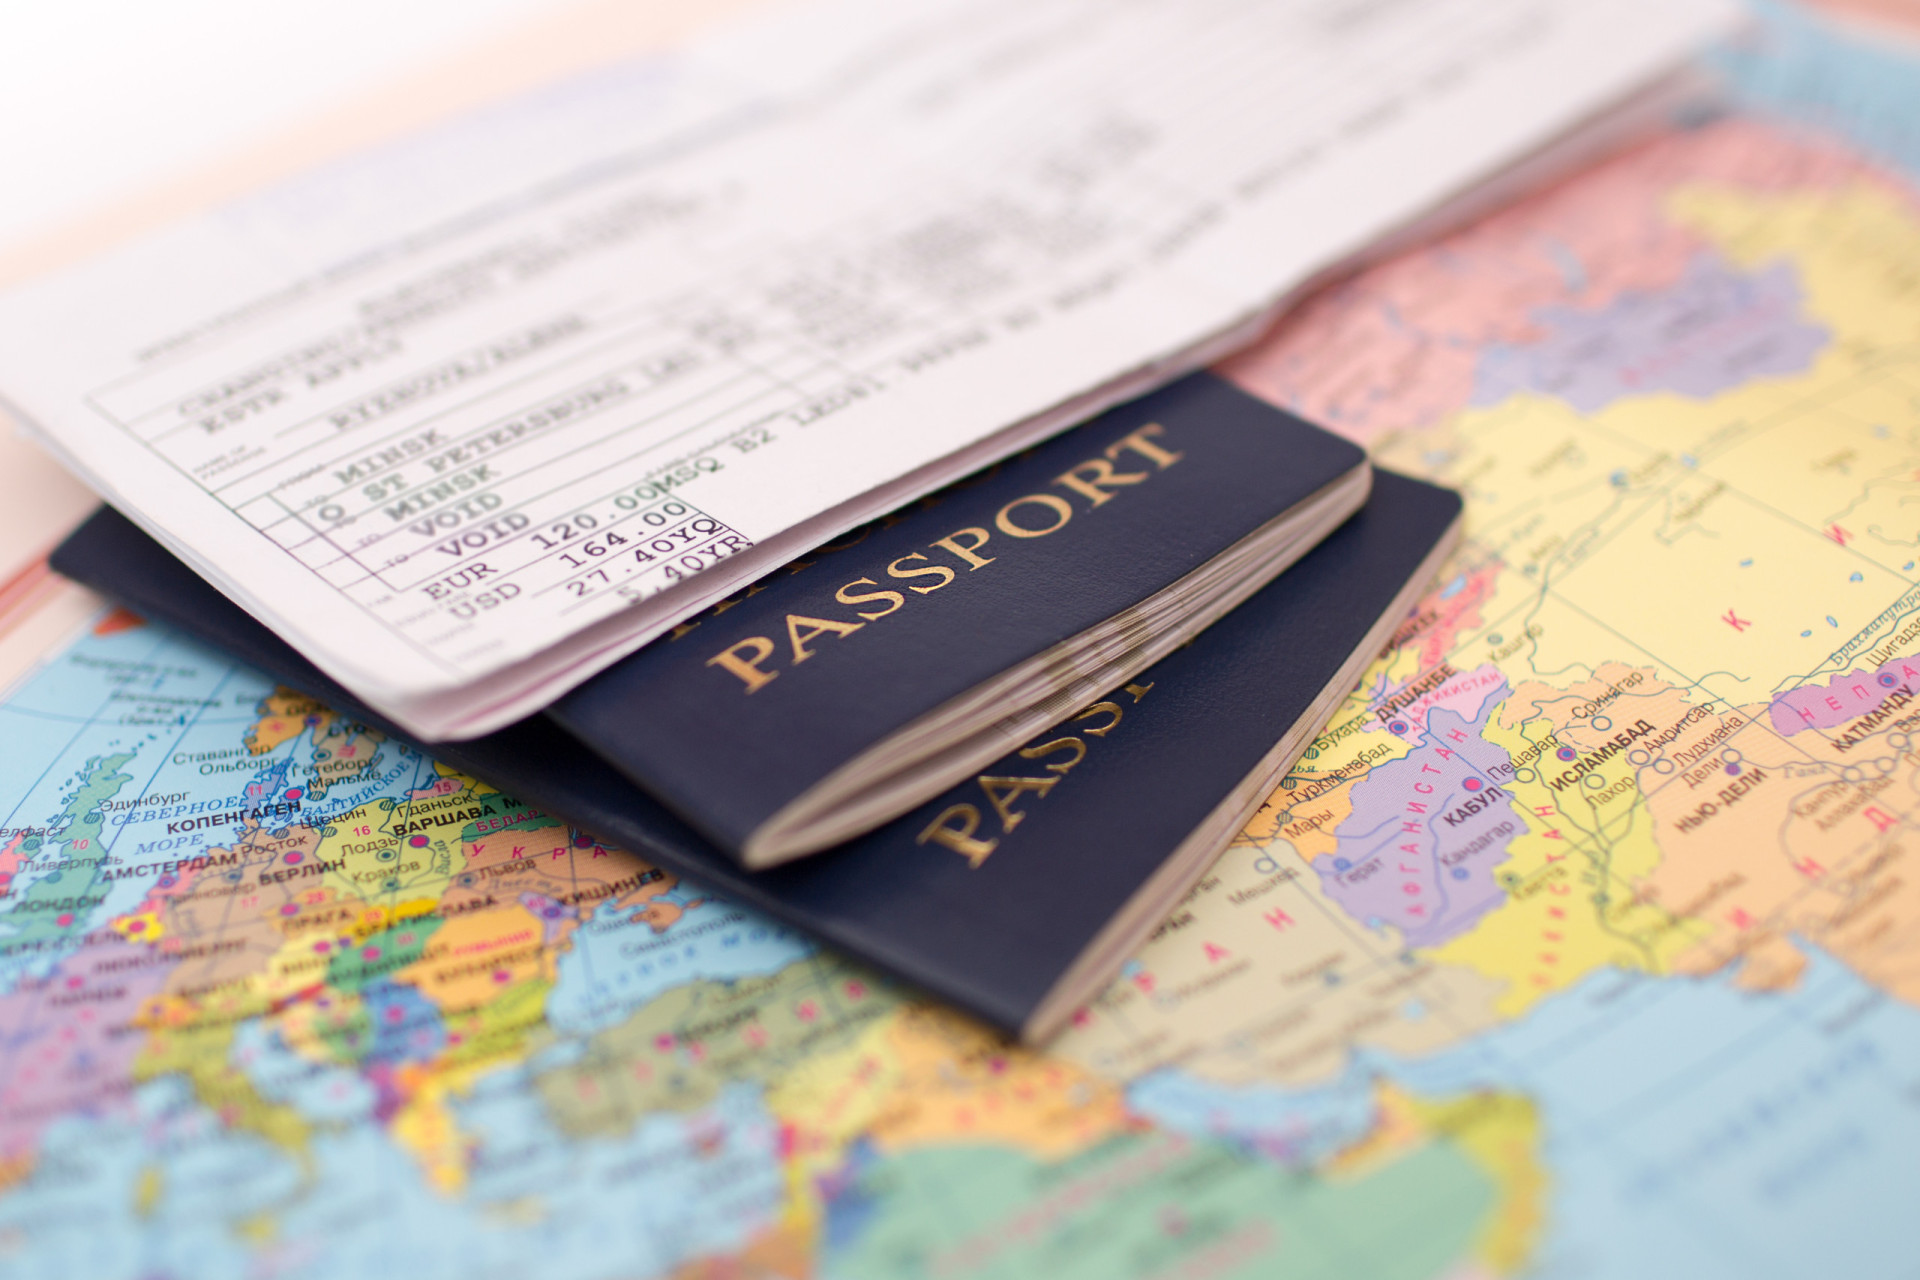 <p>Ensure you have copies of your travel itinerary, passport, visa, bank information, and vaccination documents in case the originals are stolen. Consider taking out an insurance policy to protect against the theft of your phone or other valuables.</p><p><a href="https://www.msn.com/en-us/community/channel/vid-7xx8mnucu55yw63we9va2gwr7uihbxwc68fxqp25x6tg4ftibpra?cvid=94631541bc0f4f89bfd59158d696ad7e">Follow us and access great exclusive content every day</a></p>